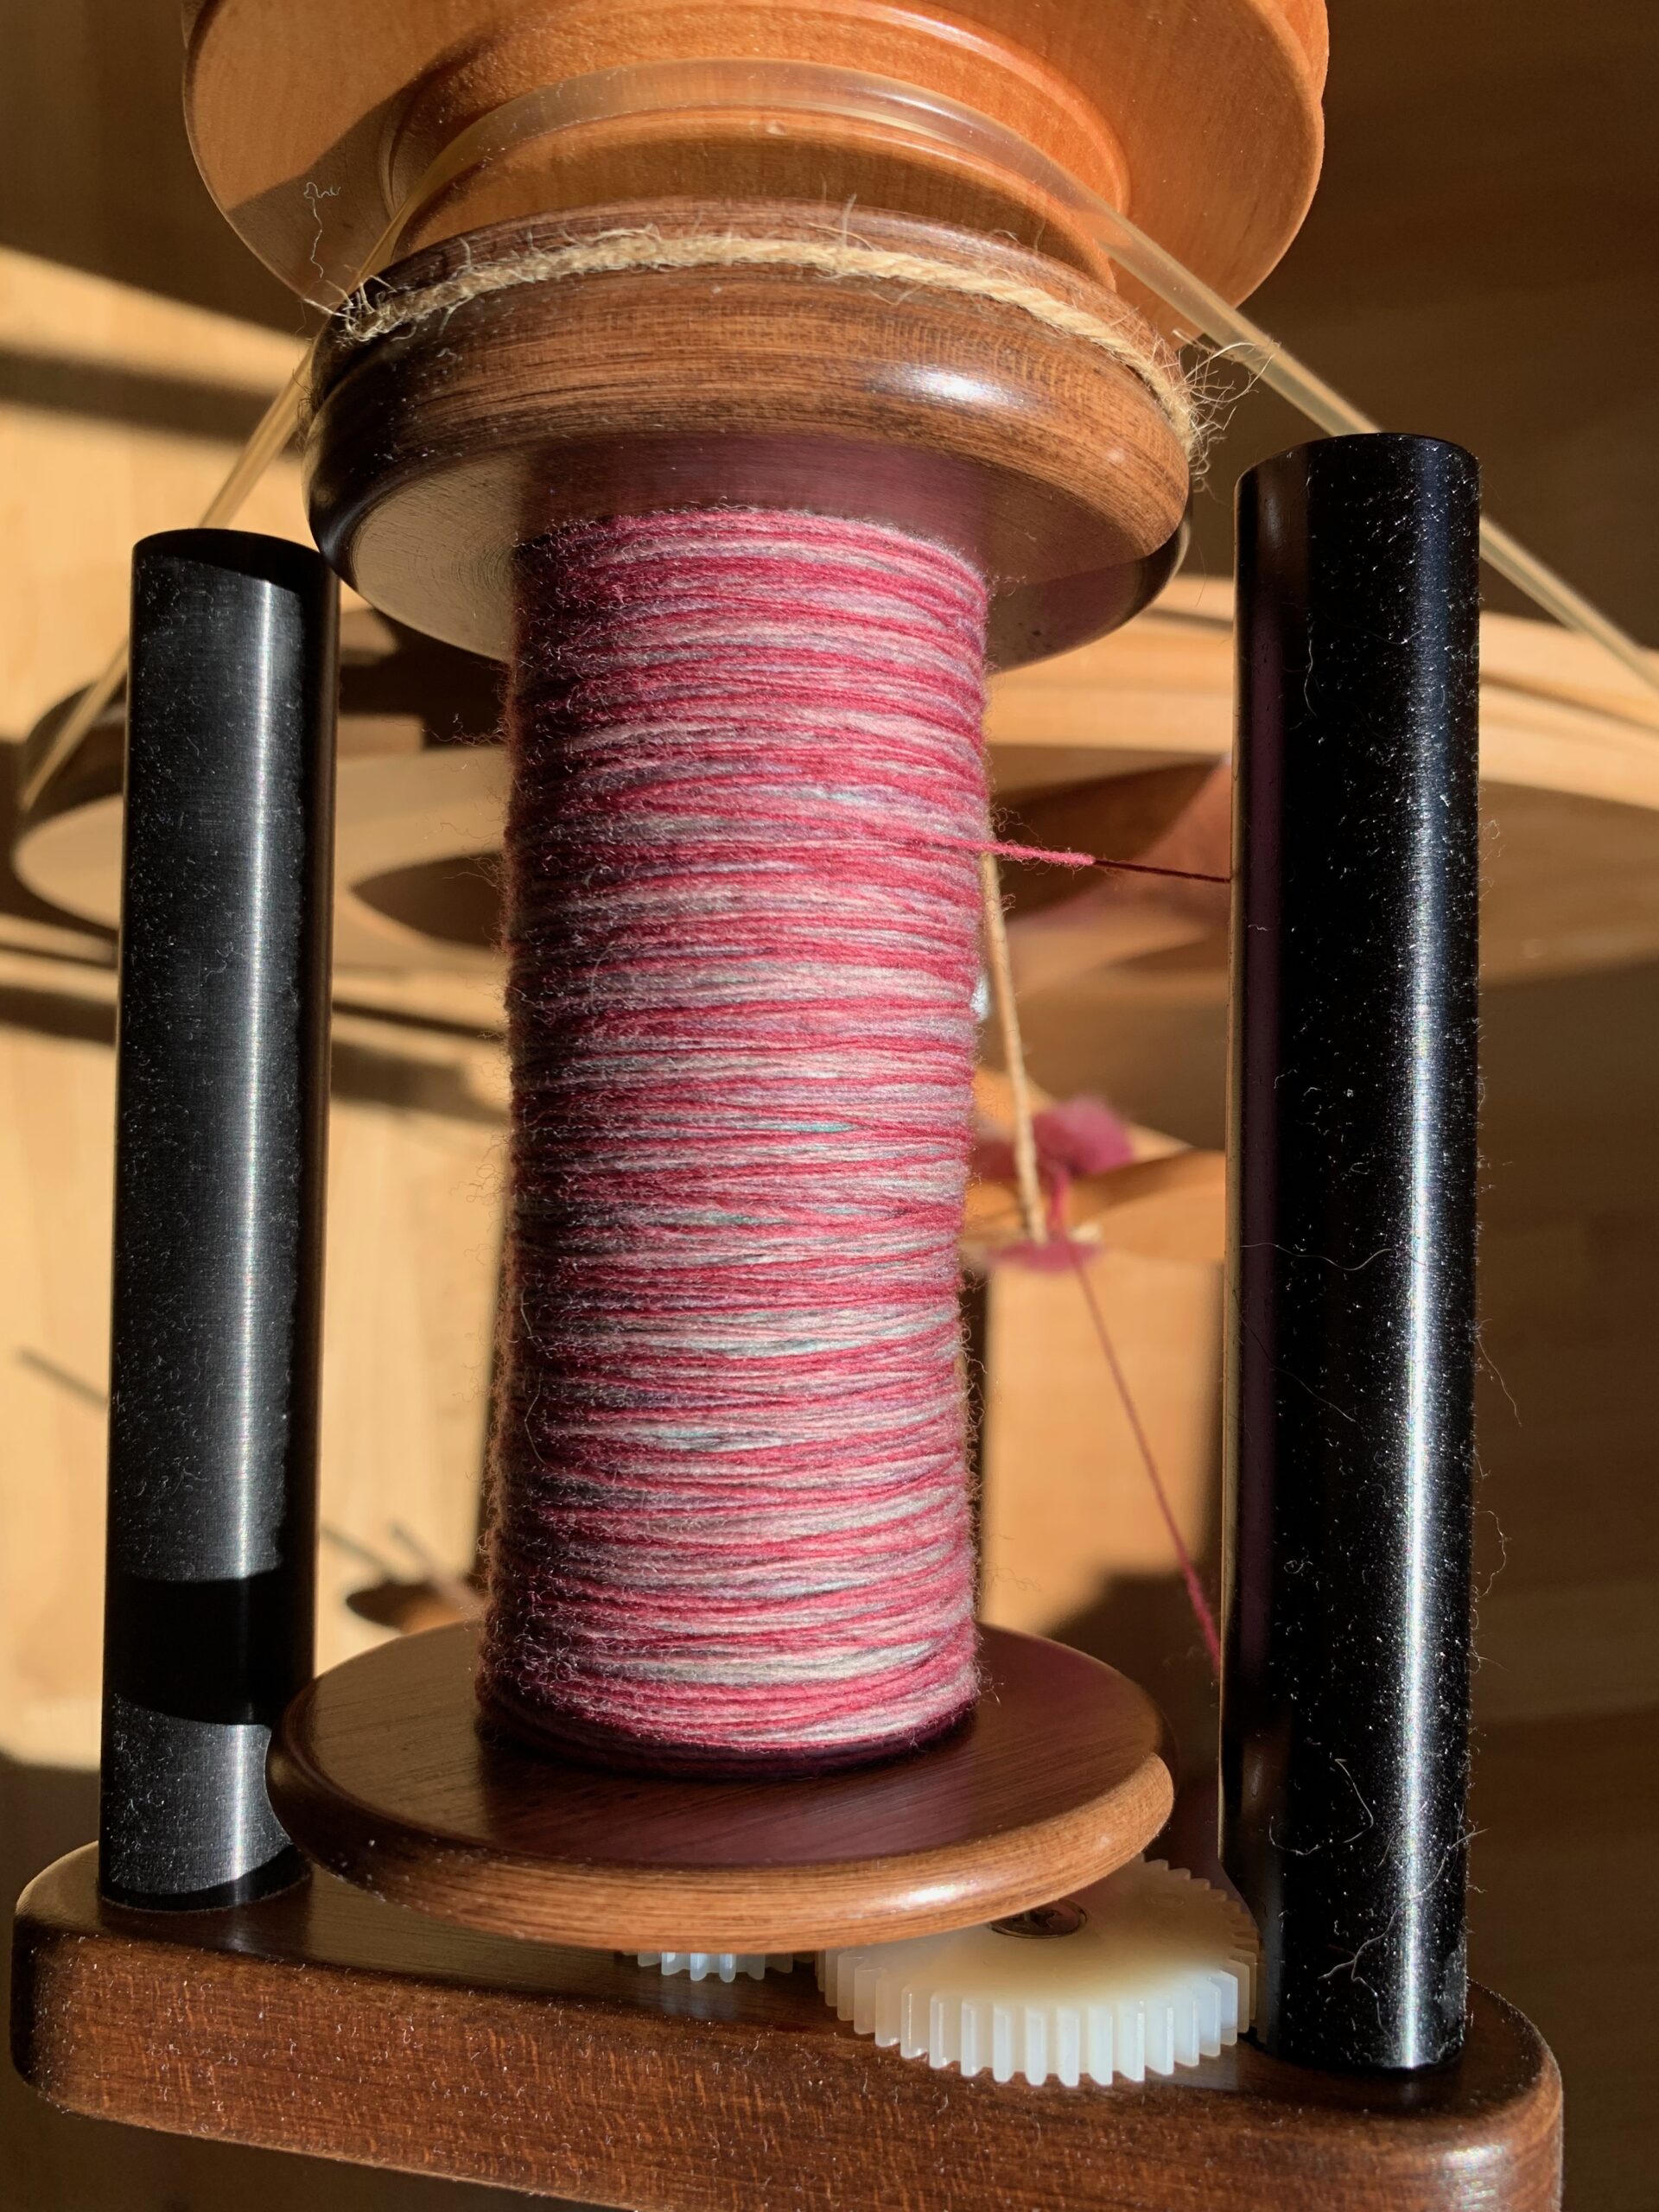 How to Spin Yarn On a Wheel - Absolute Beginner Lesson! 